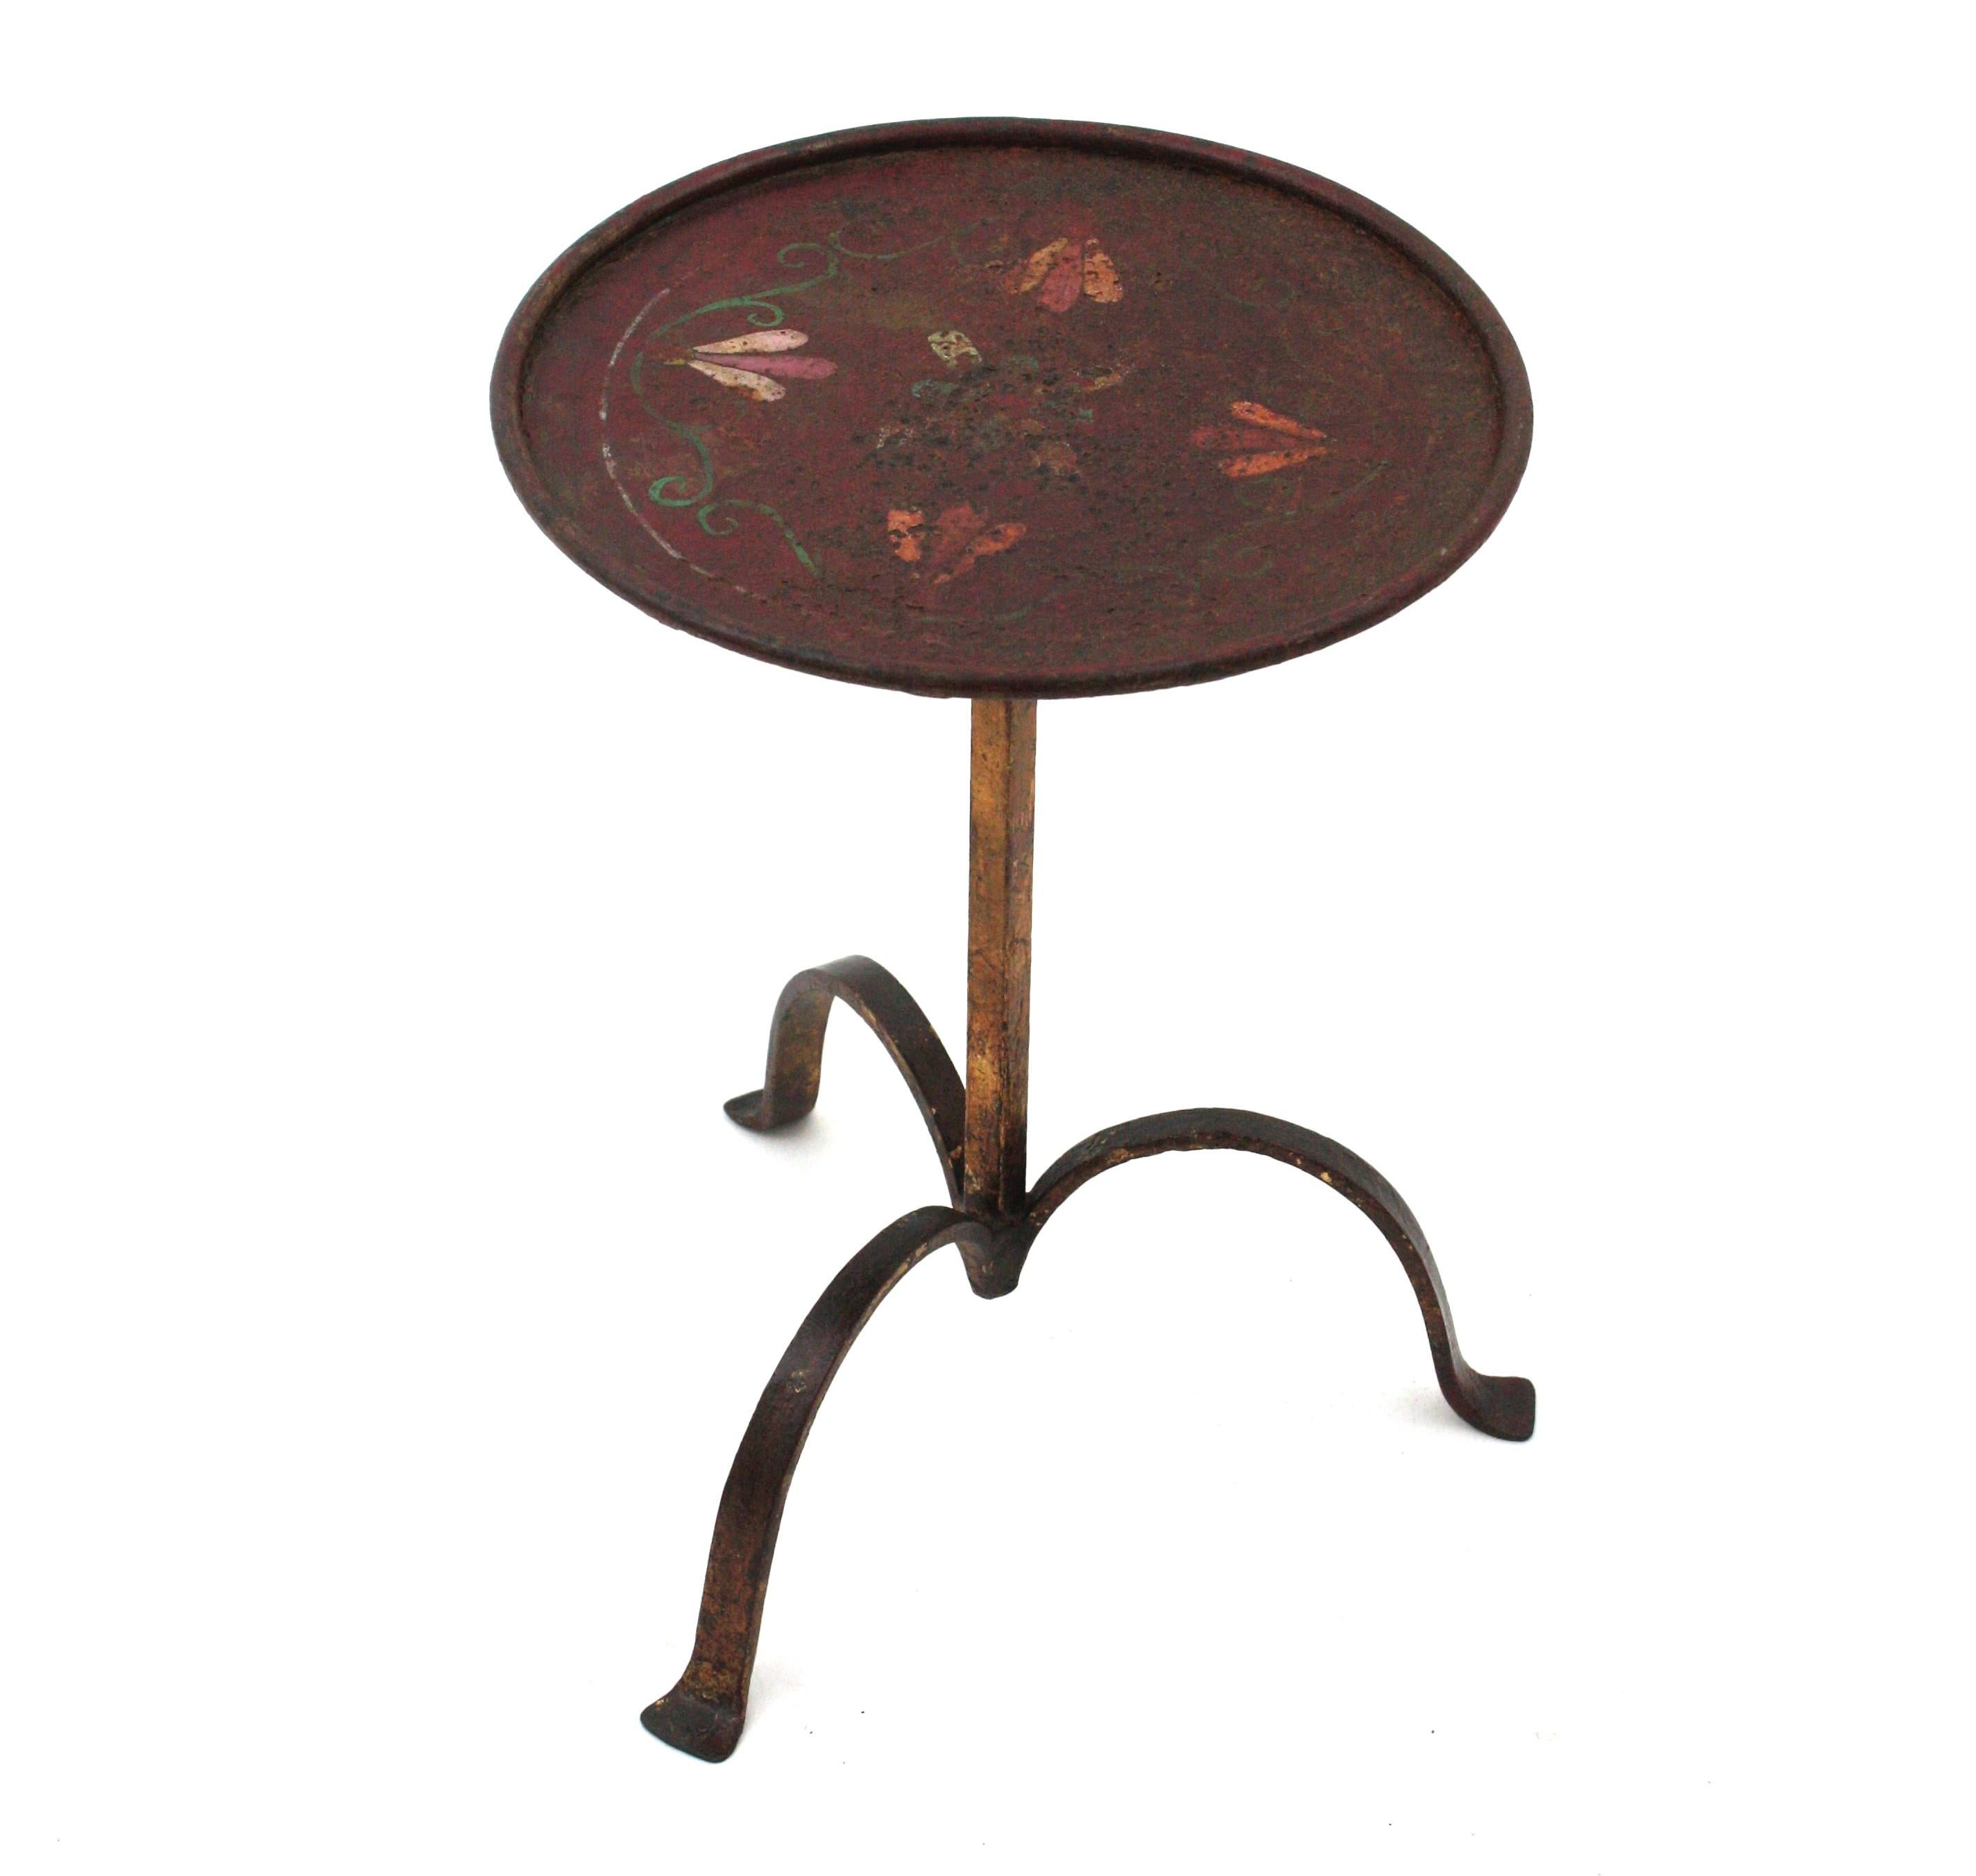 20th Century Spanish Drinks Table, End Table, Martini Table in Polychromed Gilt Iron, 1940s For Sale